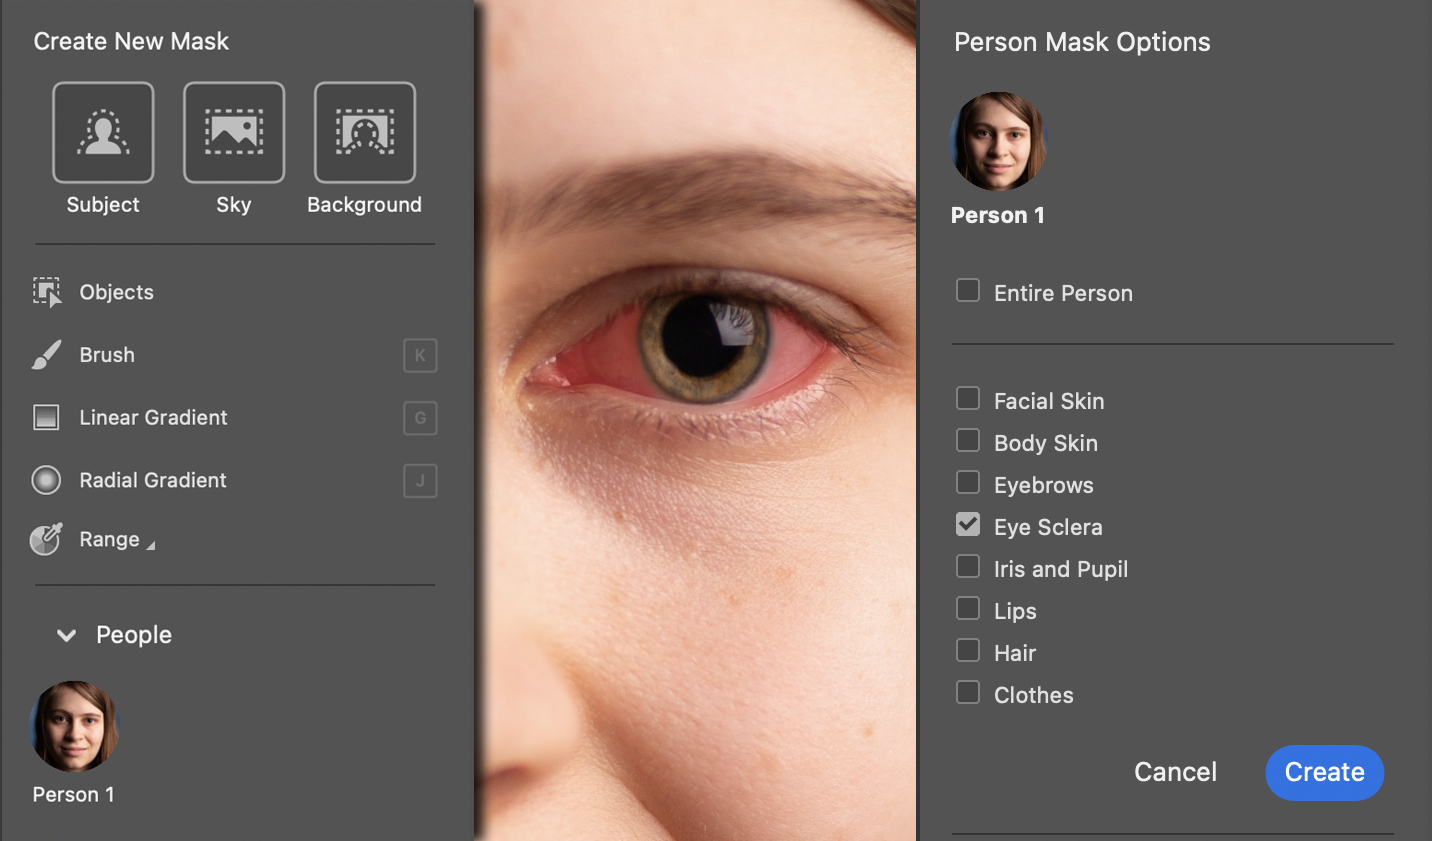 The Eye Sclera option automatically masks the whites of the eyes to prepare the area for editing.